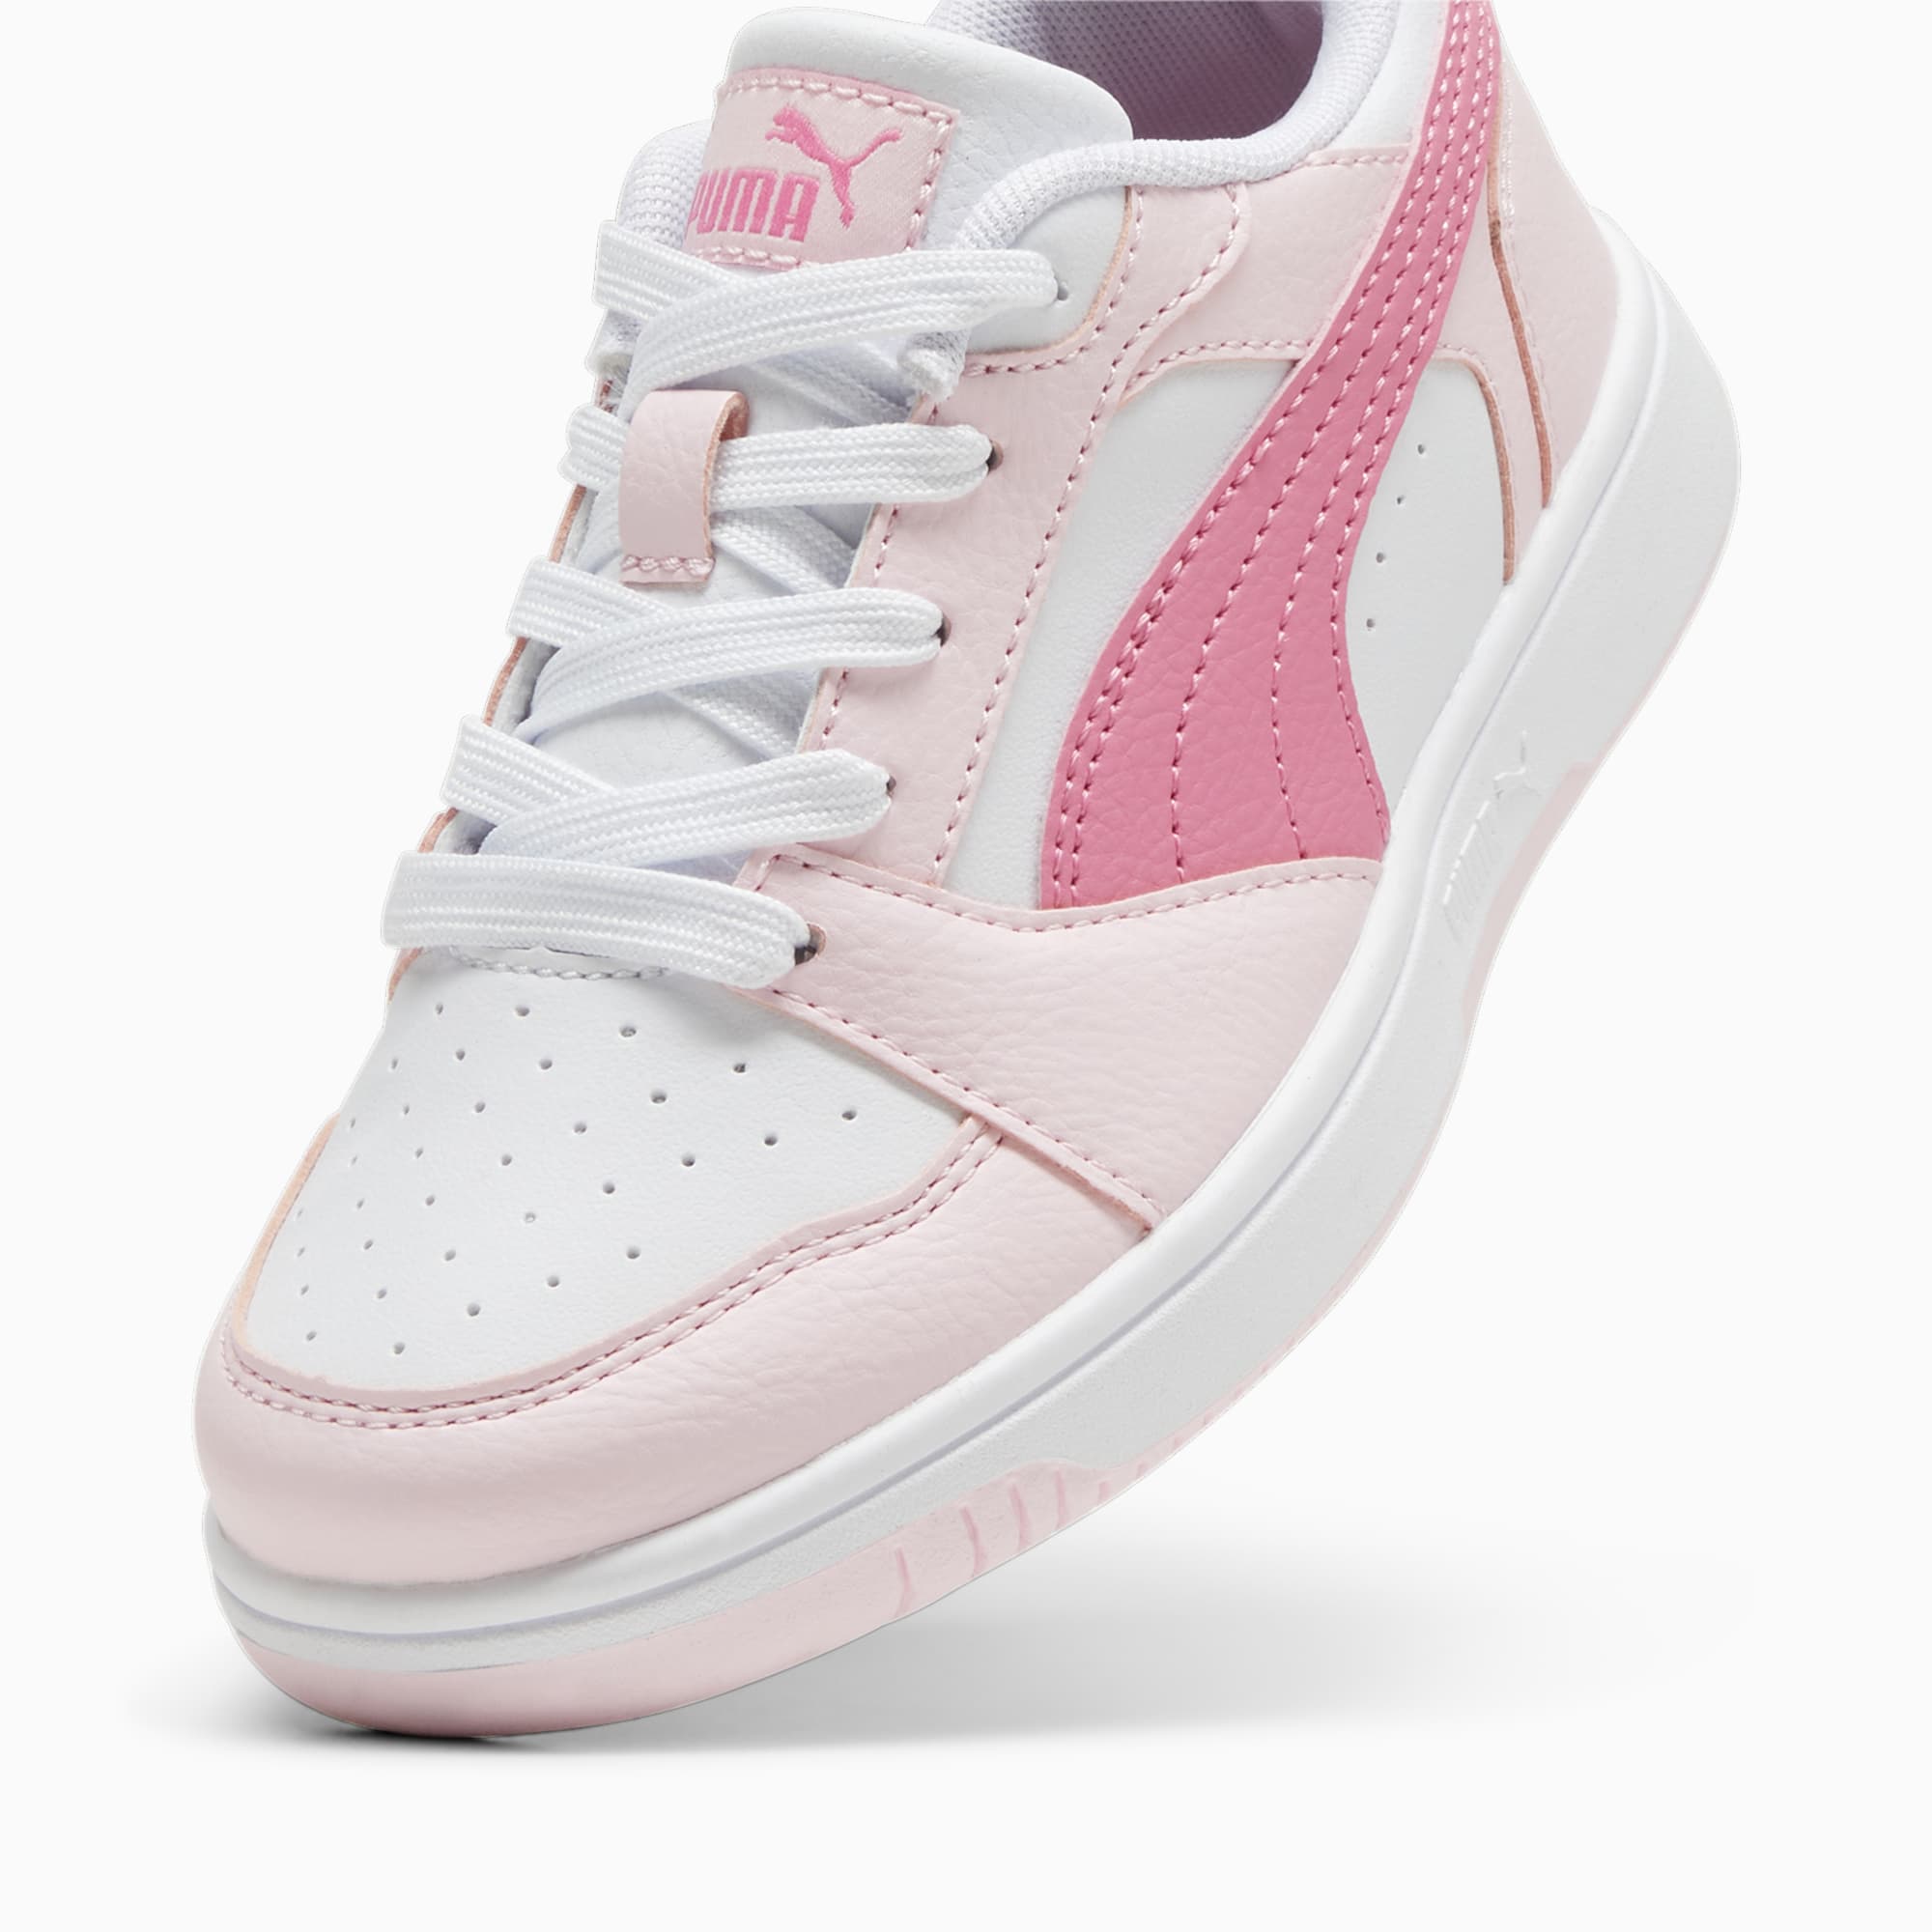 PUMA Rebound V6 Lo Kids' Sneakers, White/Fast Pink/Whisp Of Pink, Size 27,5, Shoes